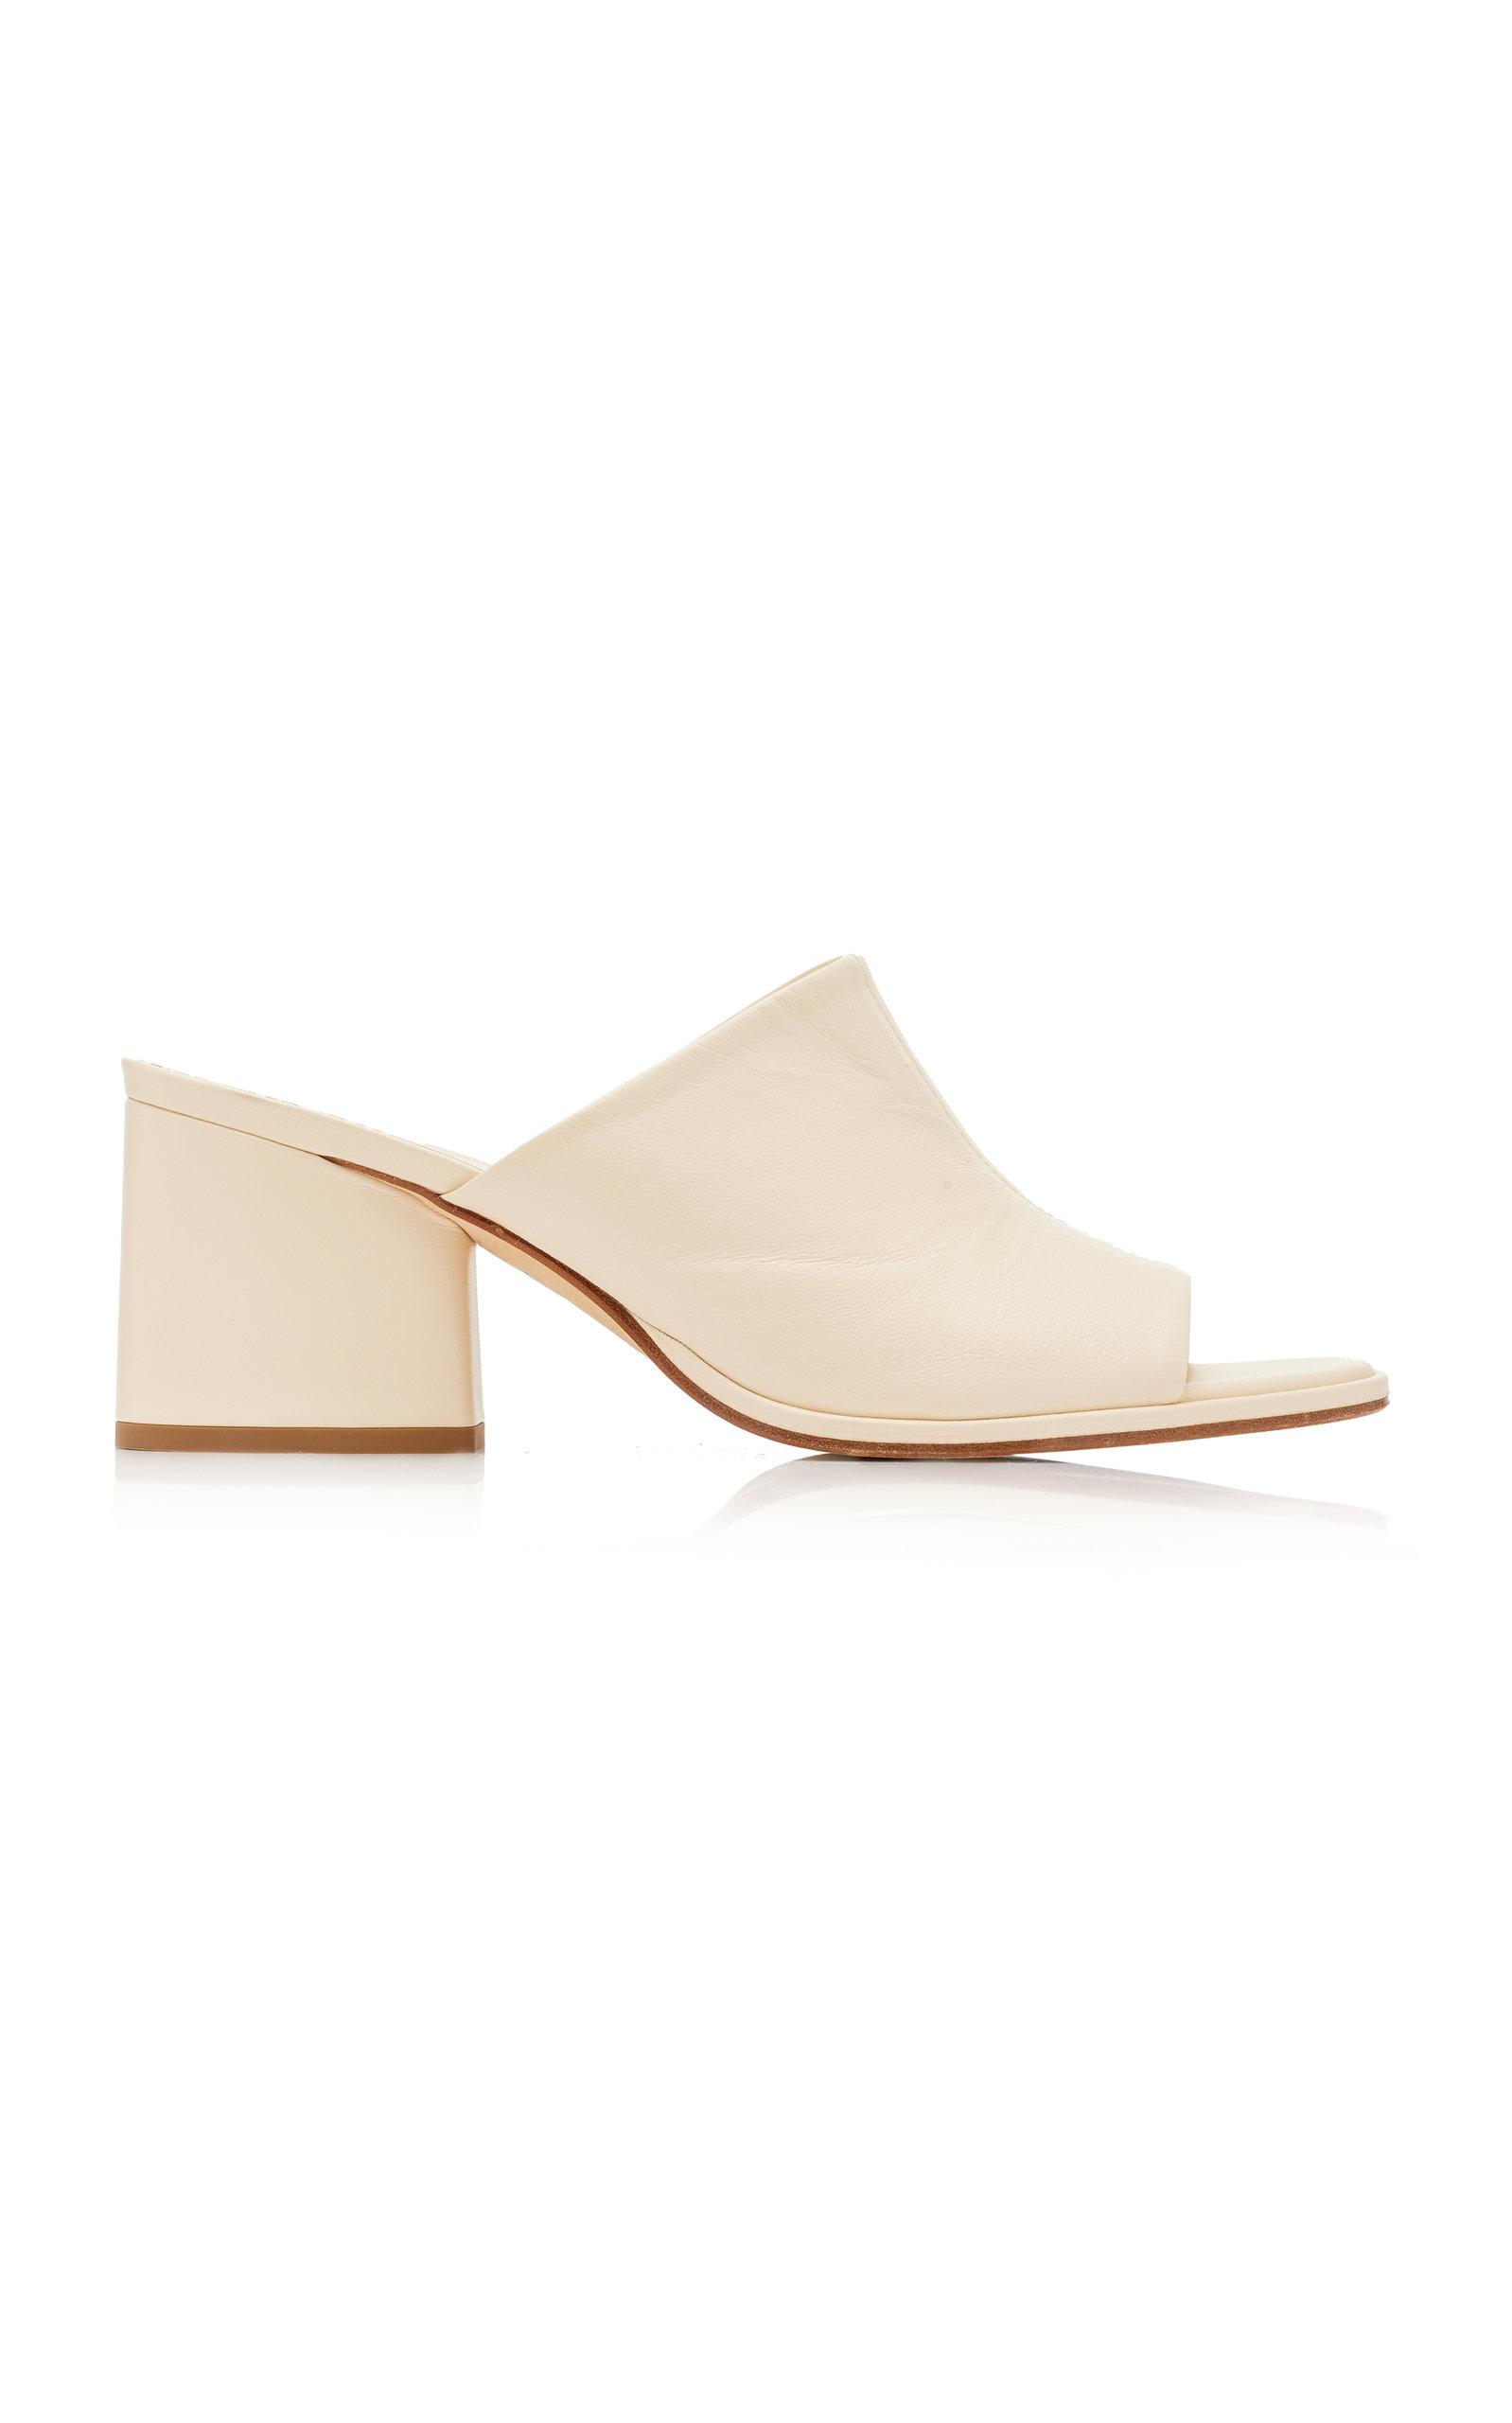 Aeyde Amanda Nappa Leather Sandals in Natural | Lyst